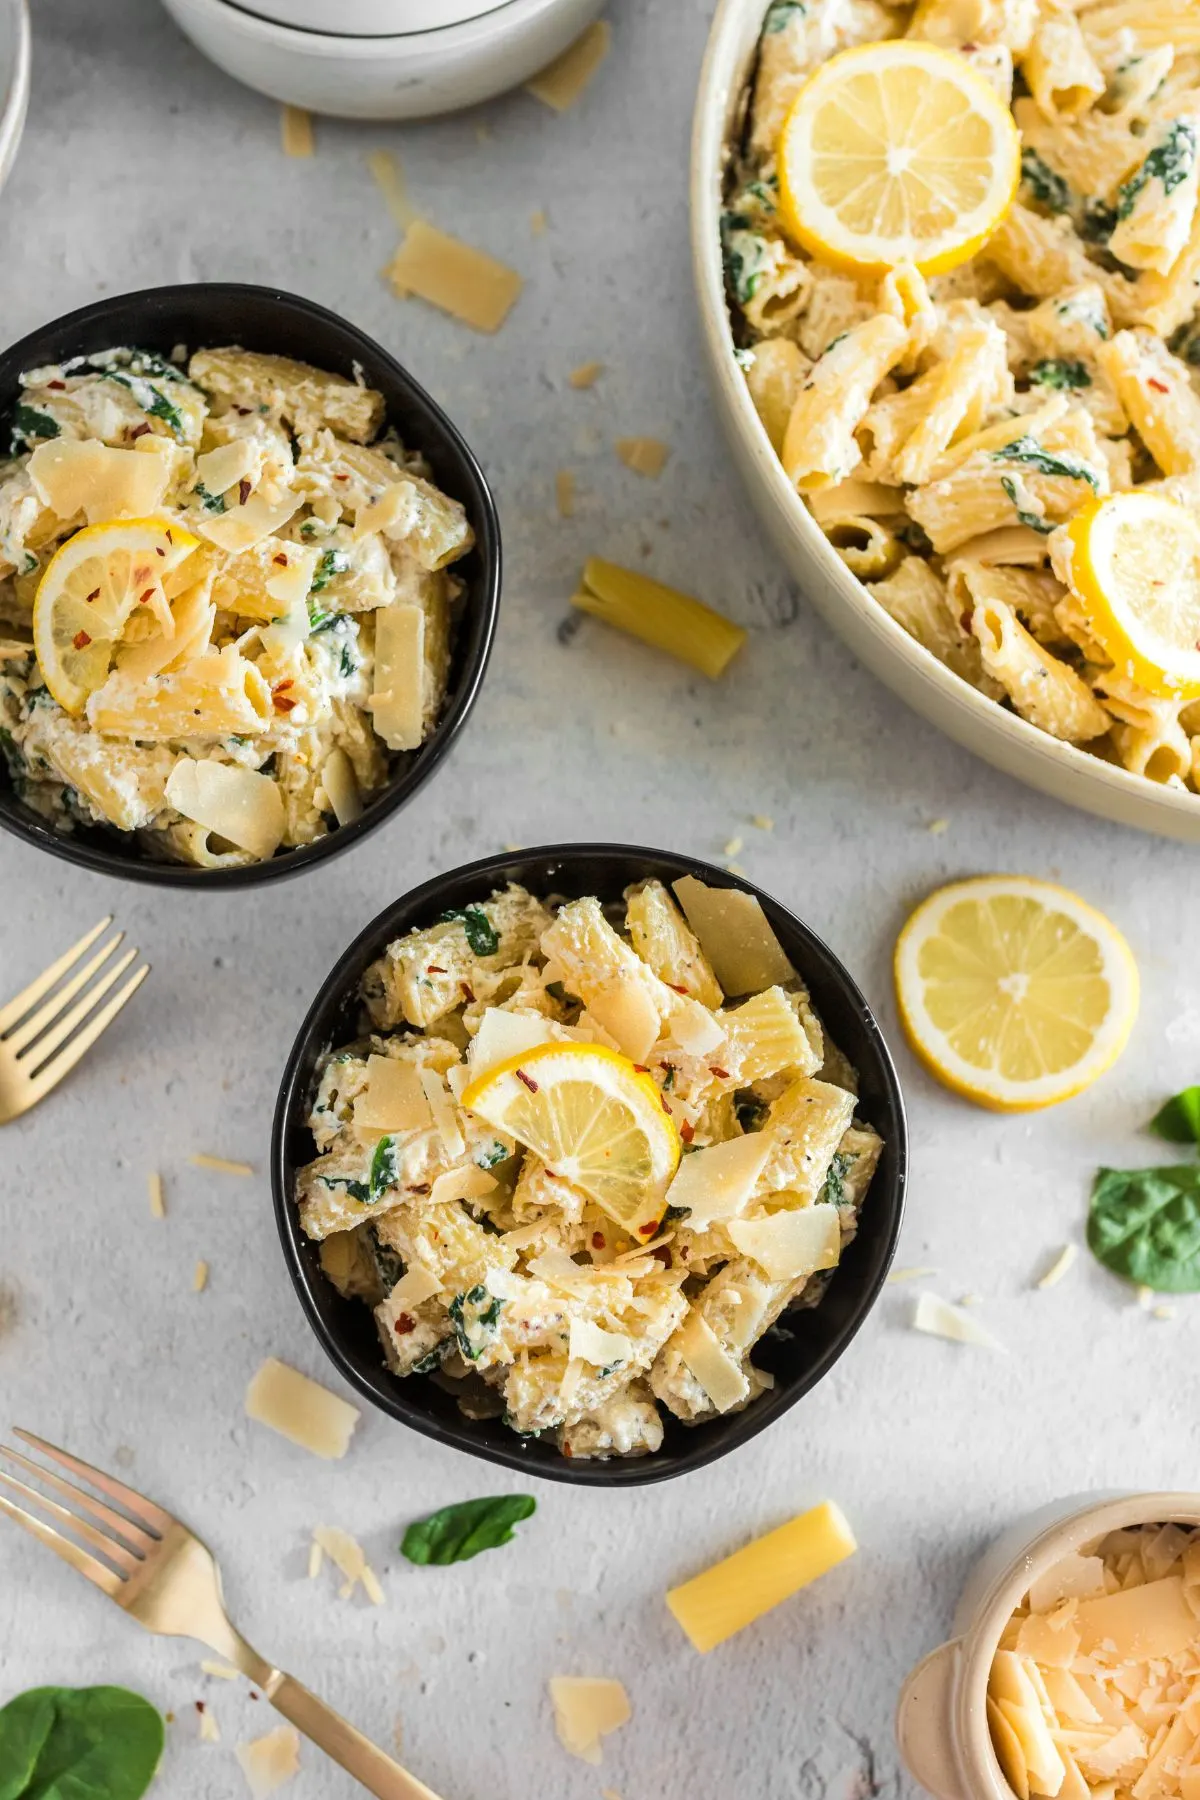 Looking down on two black bowls filled with Lemon Pasta with Ricotta Sauce.